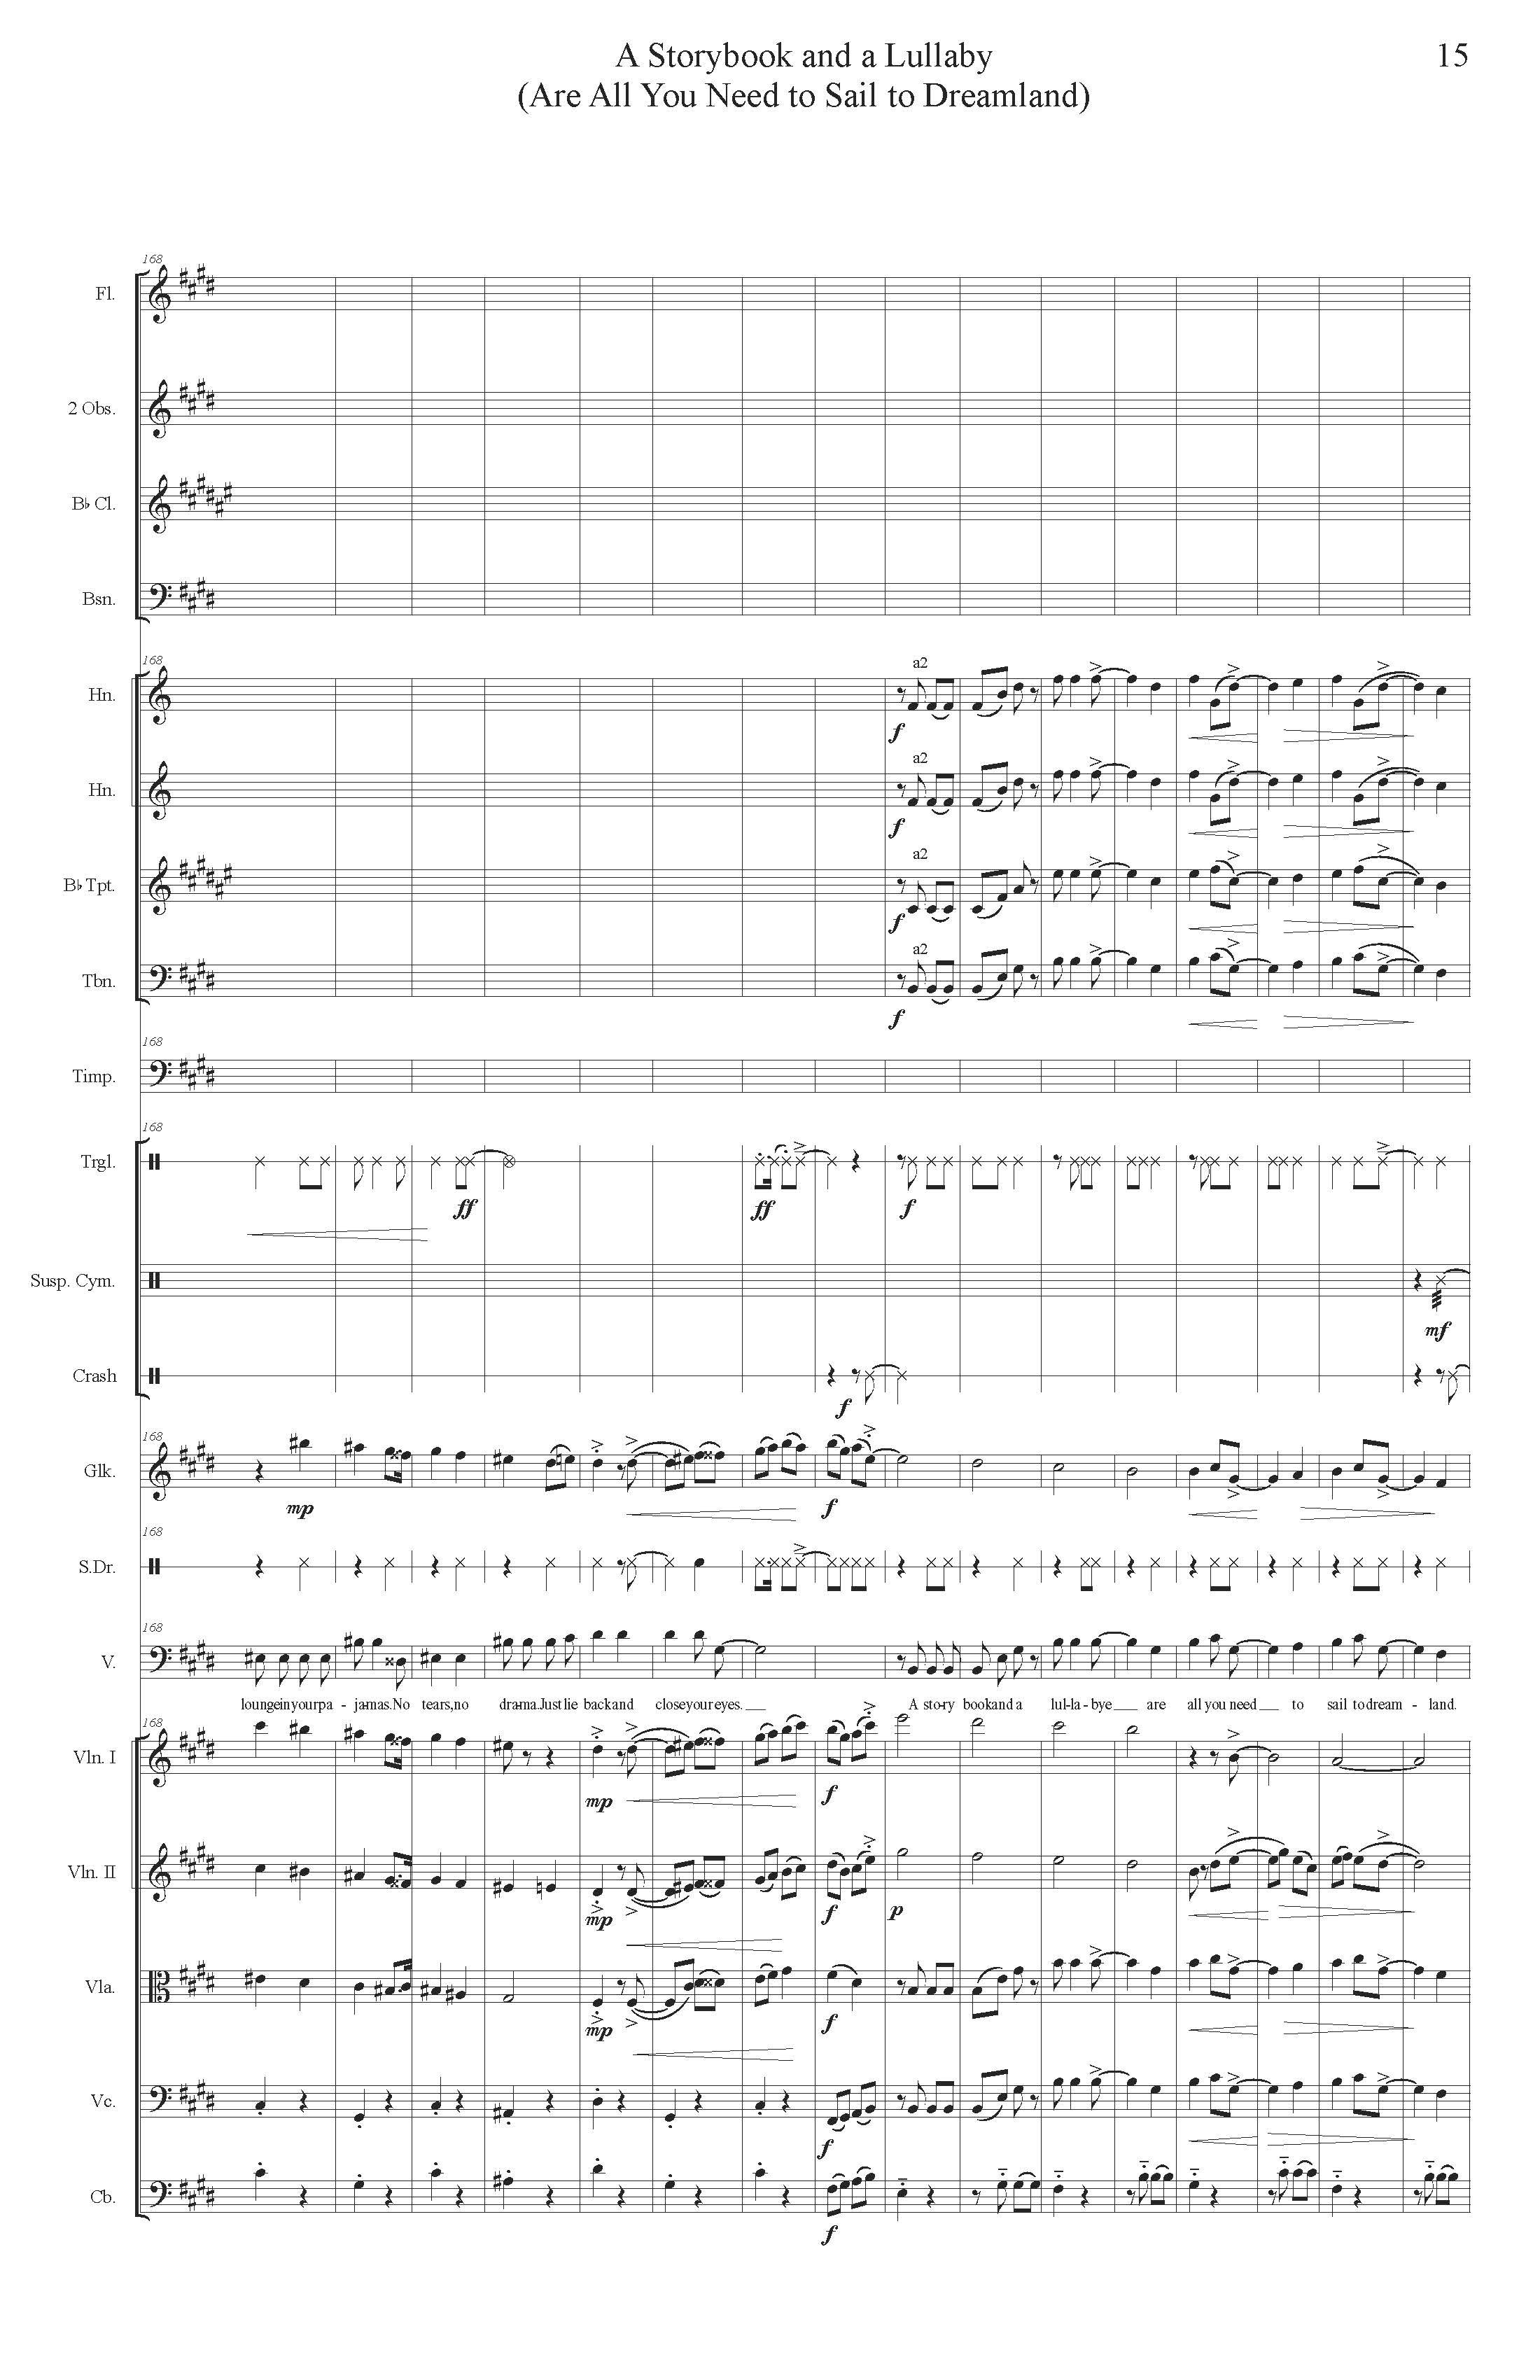 A STORYBOOK AND A LULLABY ORCH - Score_Page_15.jpg